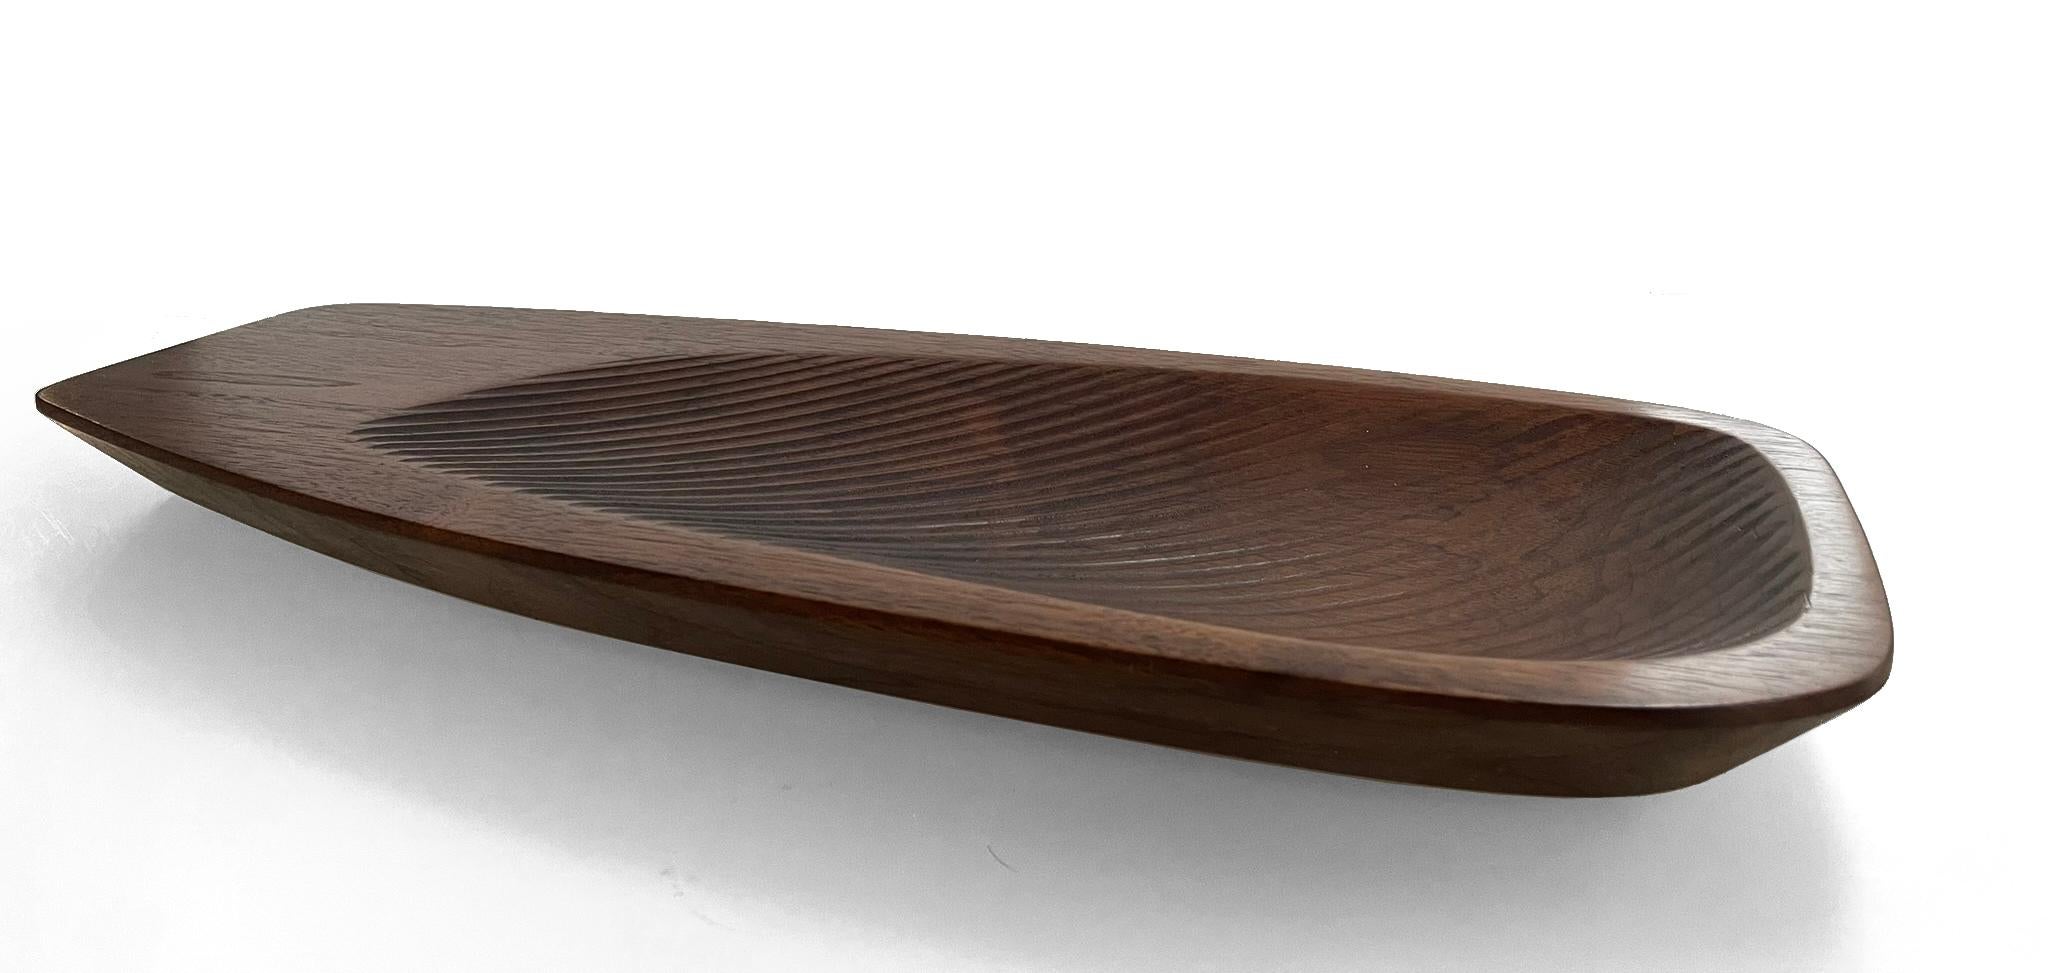 This decorative walnut bowl can function as a valet tray or table centerpiece. The Valas is named after the Finnish word for 